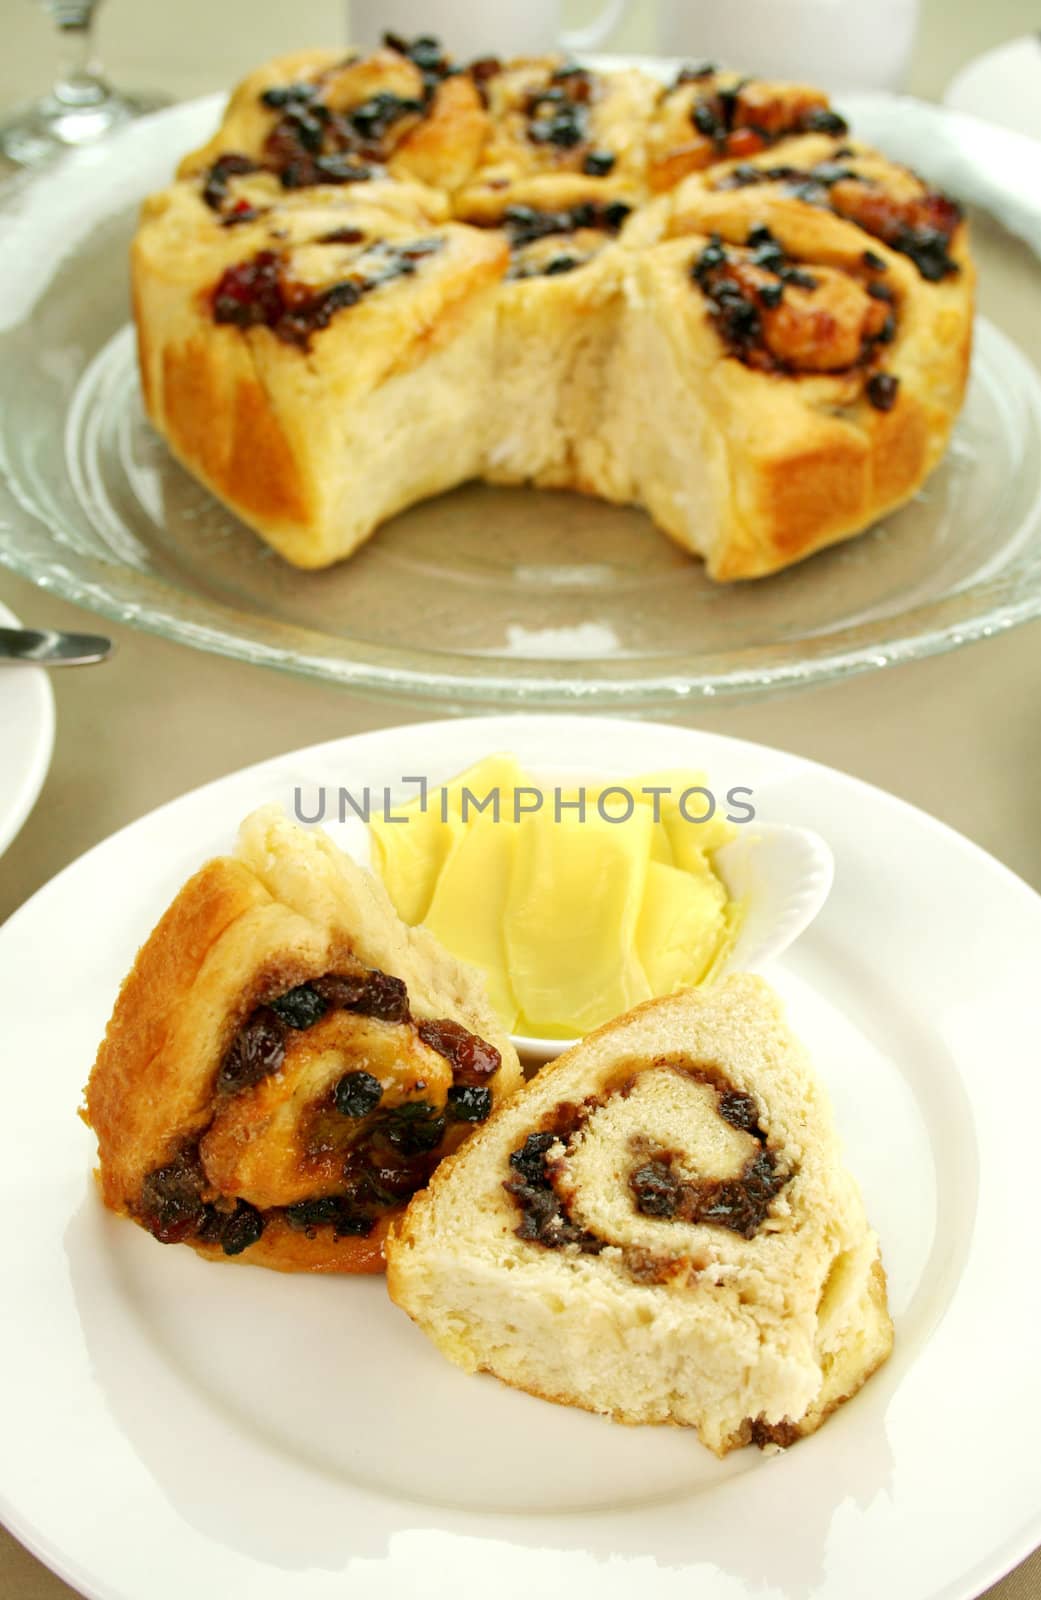 Delicious chelsea bun with dried fruit ready to serve.